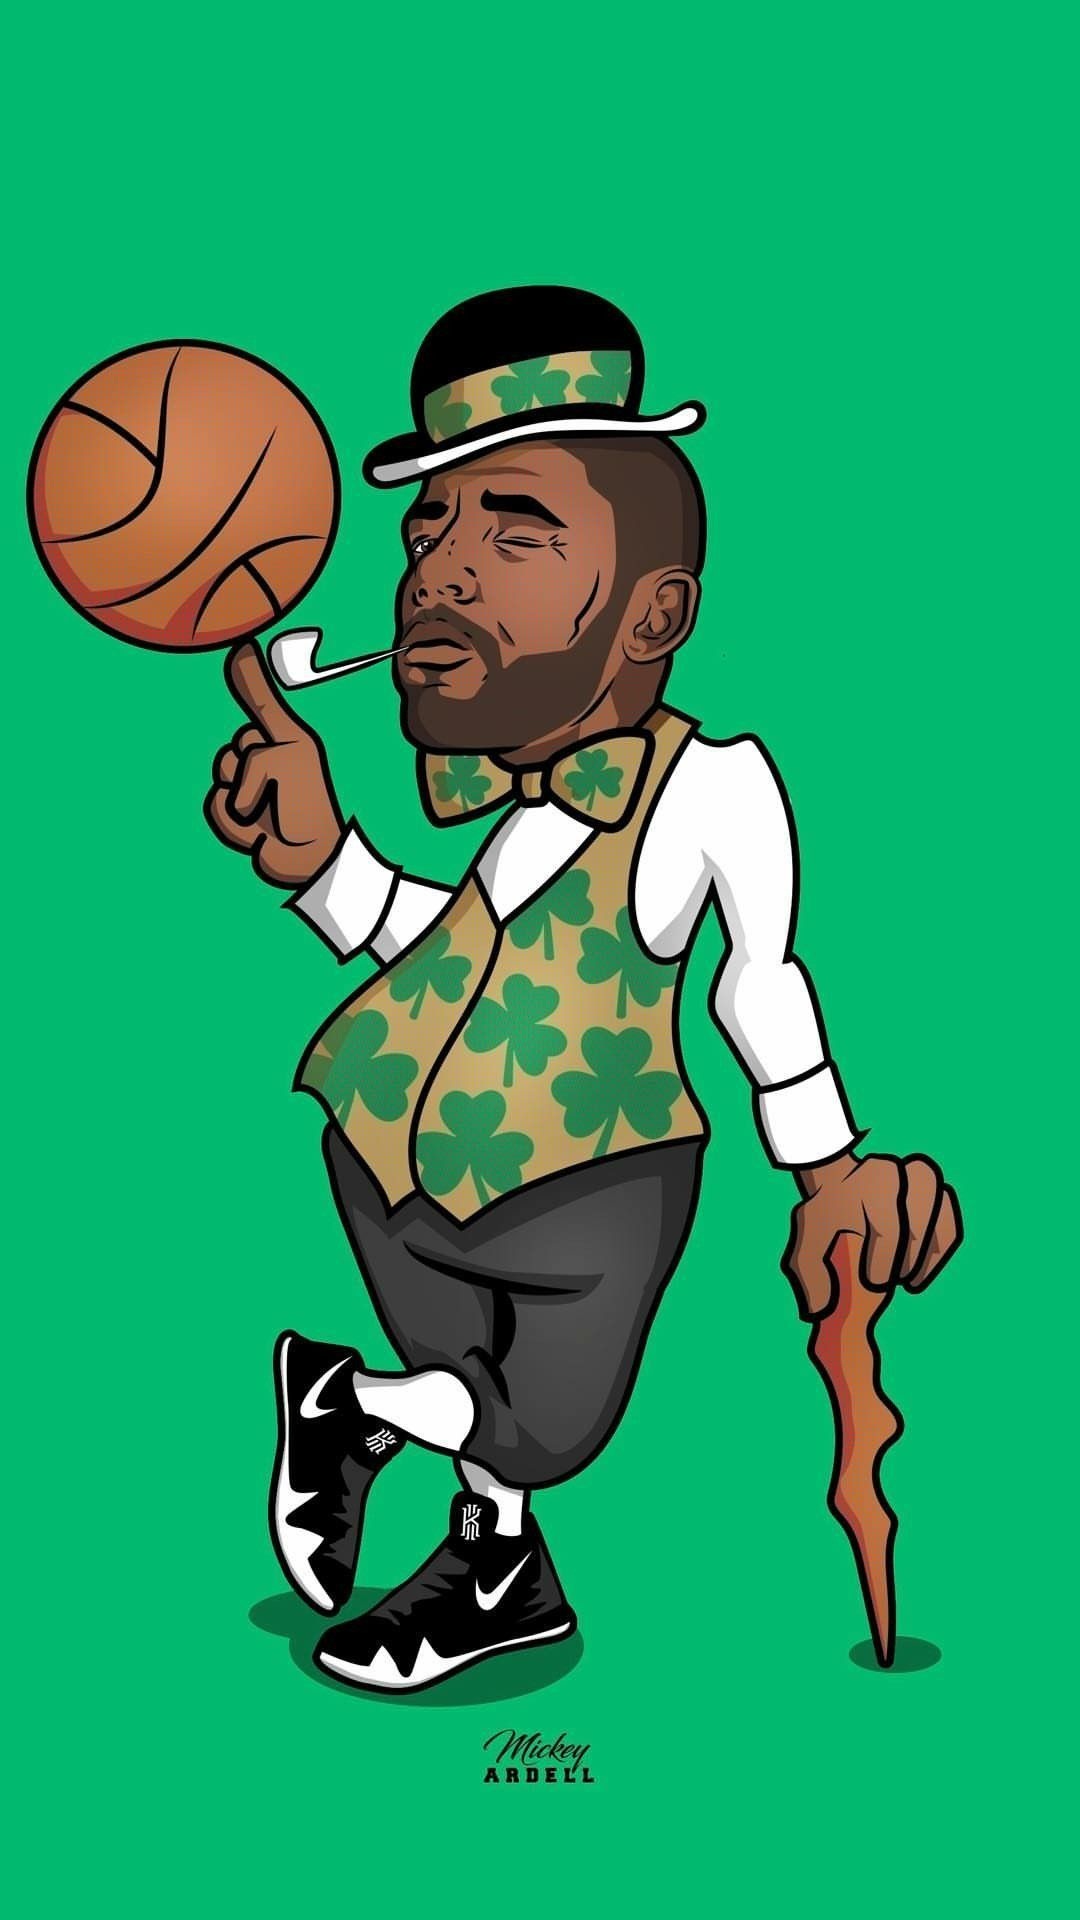 1080x1920 Kyrie Irving Cartoon Wallpapers Top Free Kyrie Irving Cartoon Backgrounds